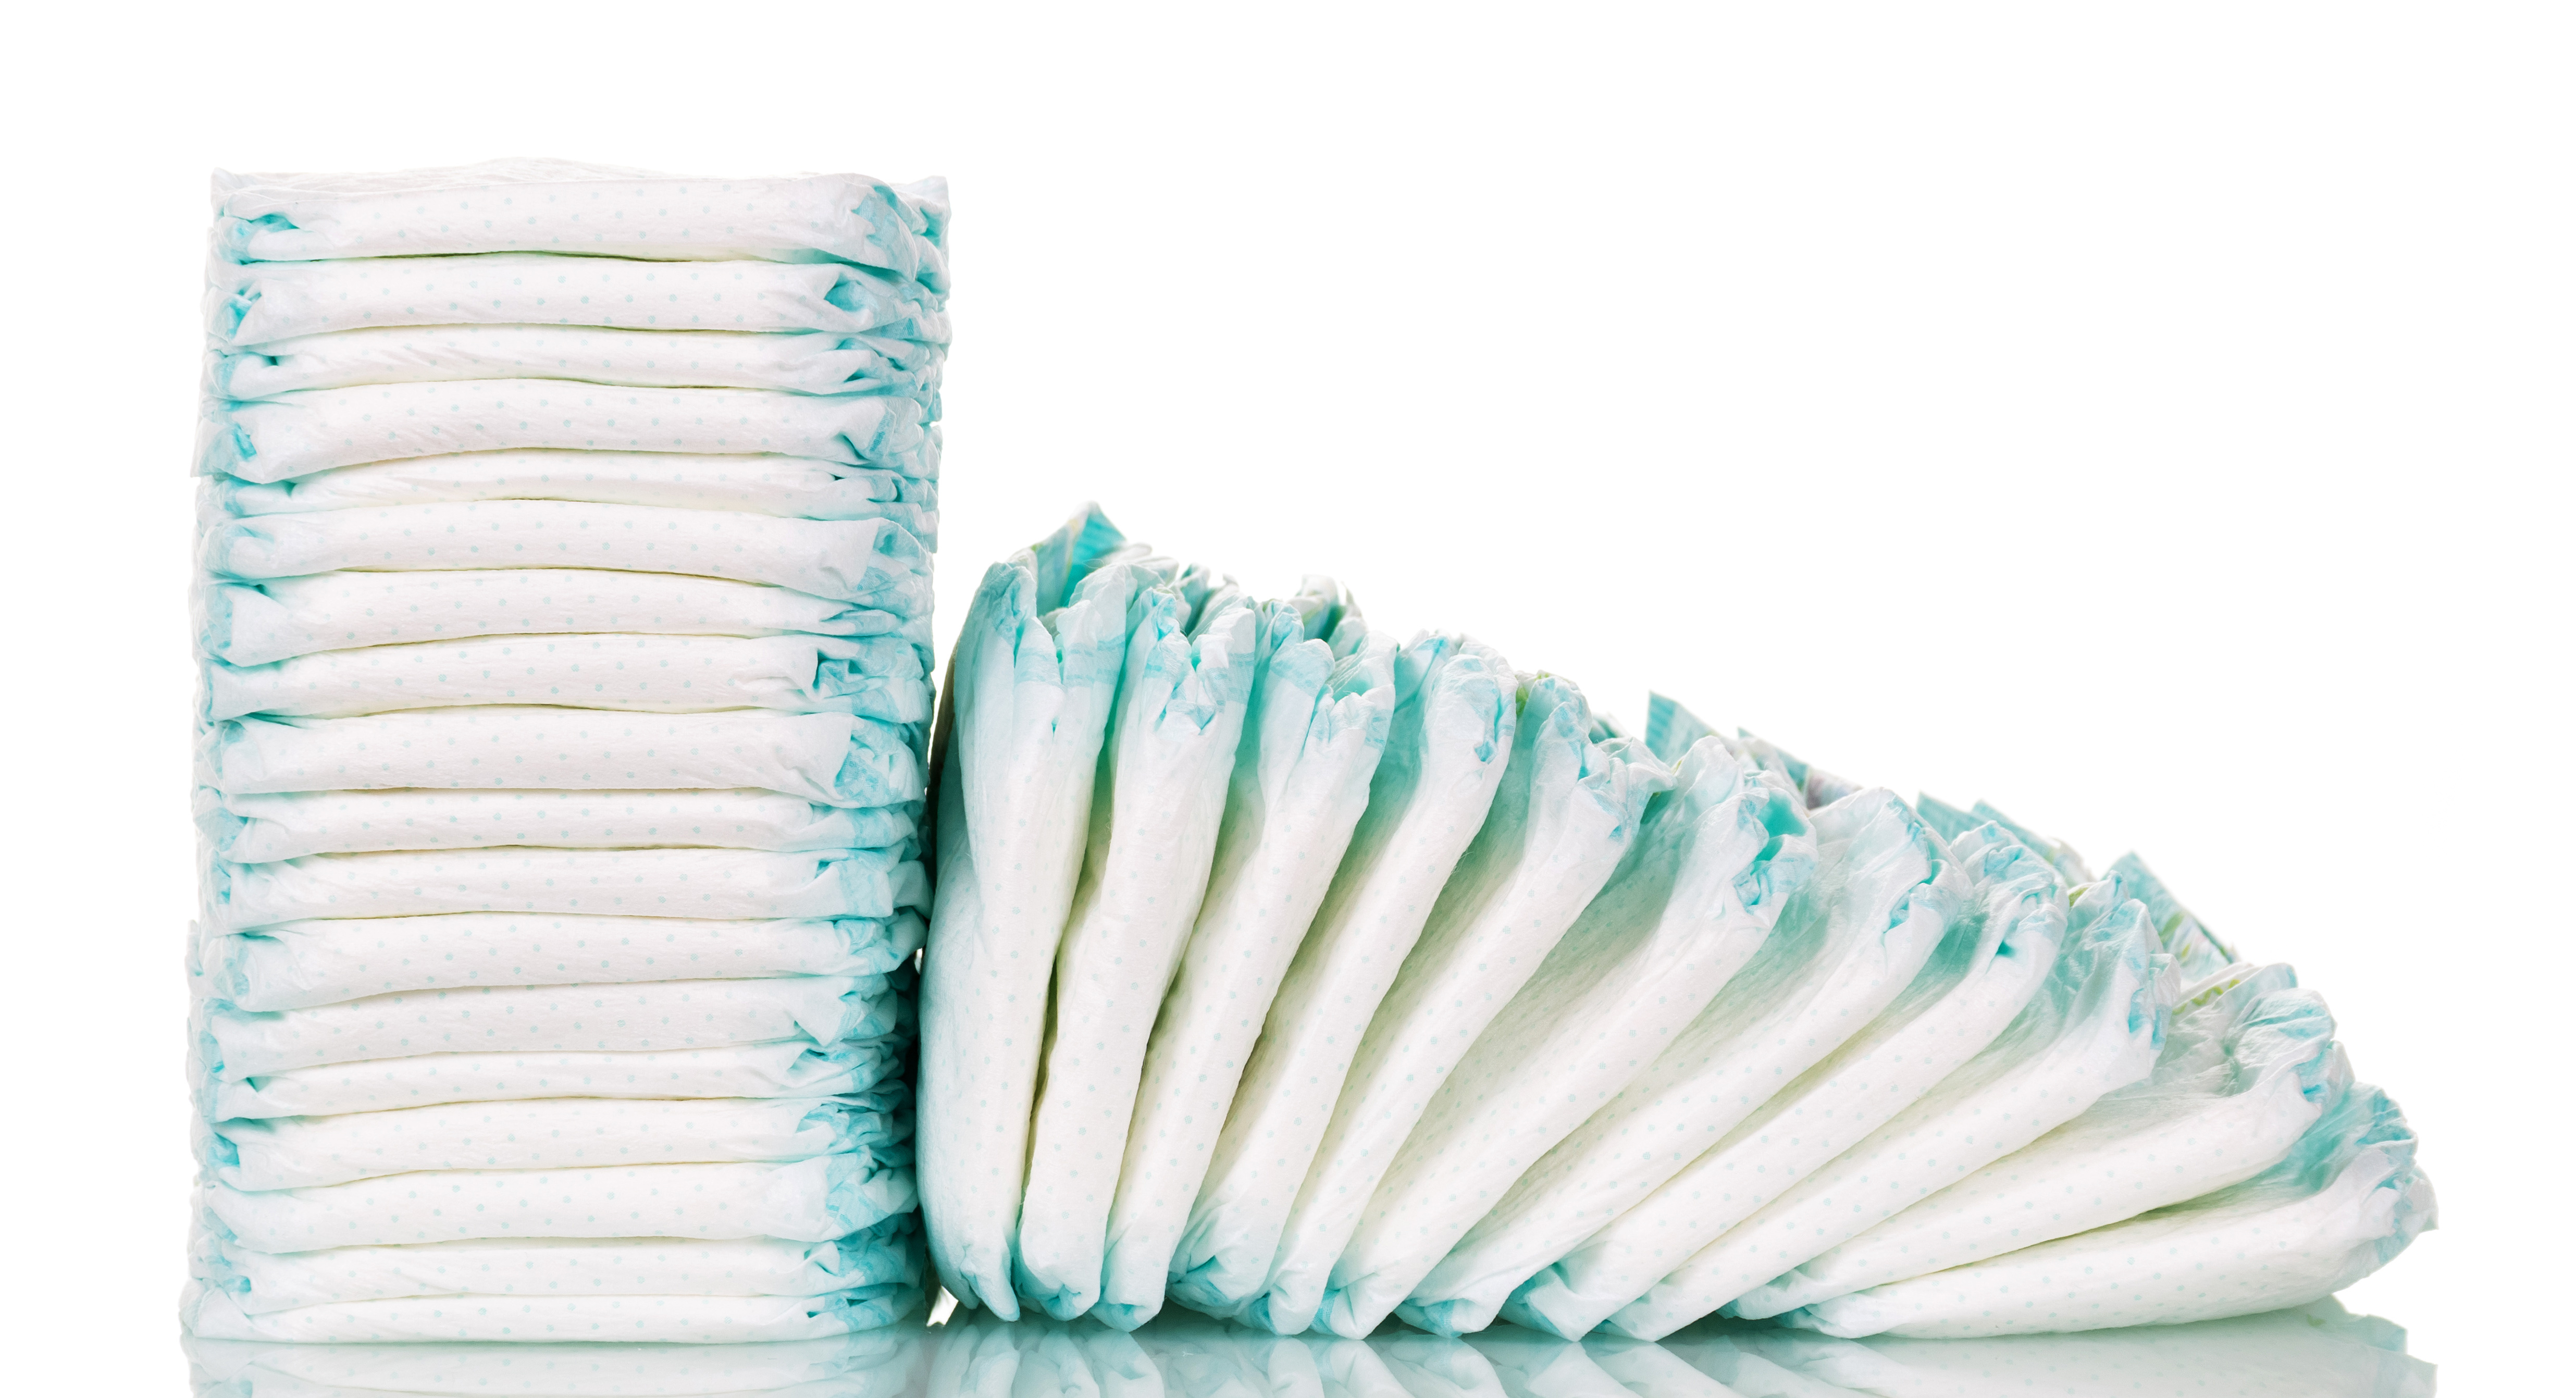 Tips for Choosing the Best Hassle-free Disposable Diapers